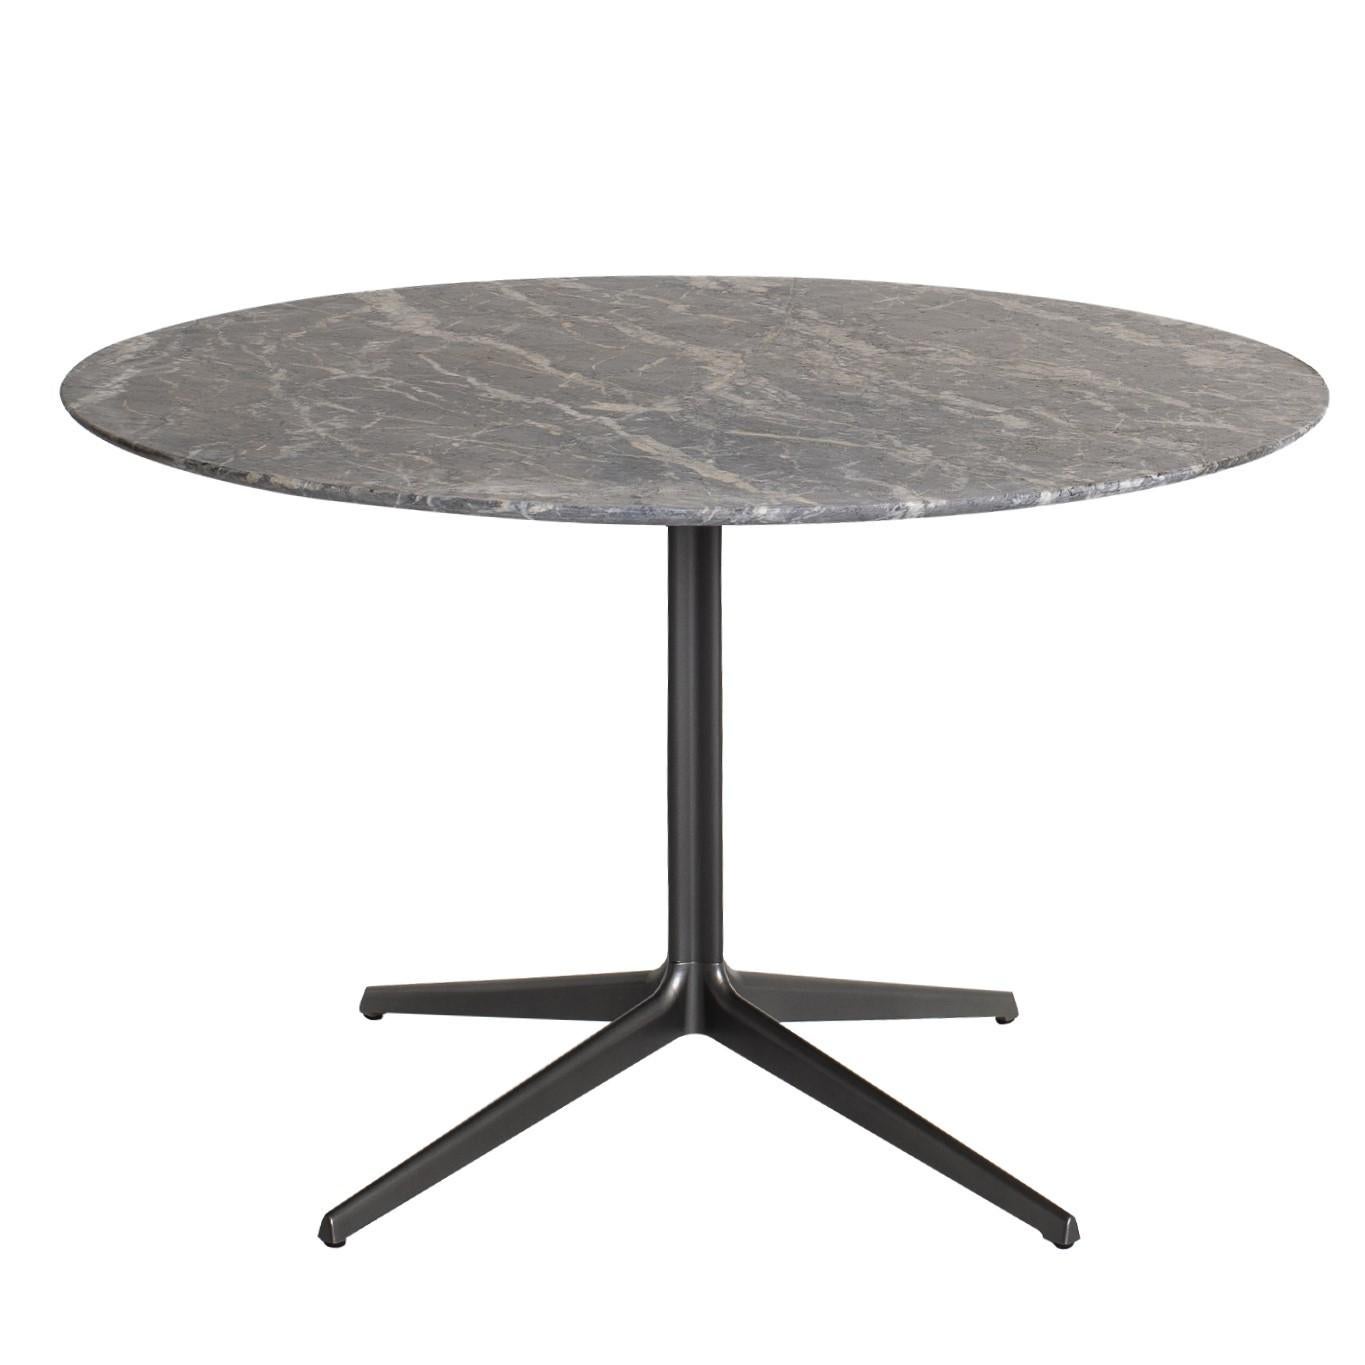 Italian Bistrot 01 Dining Table